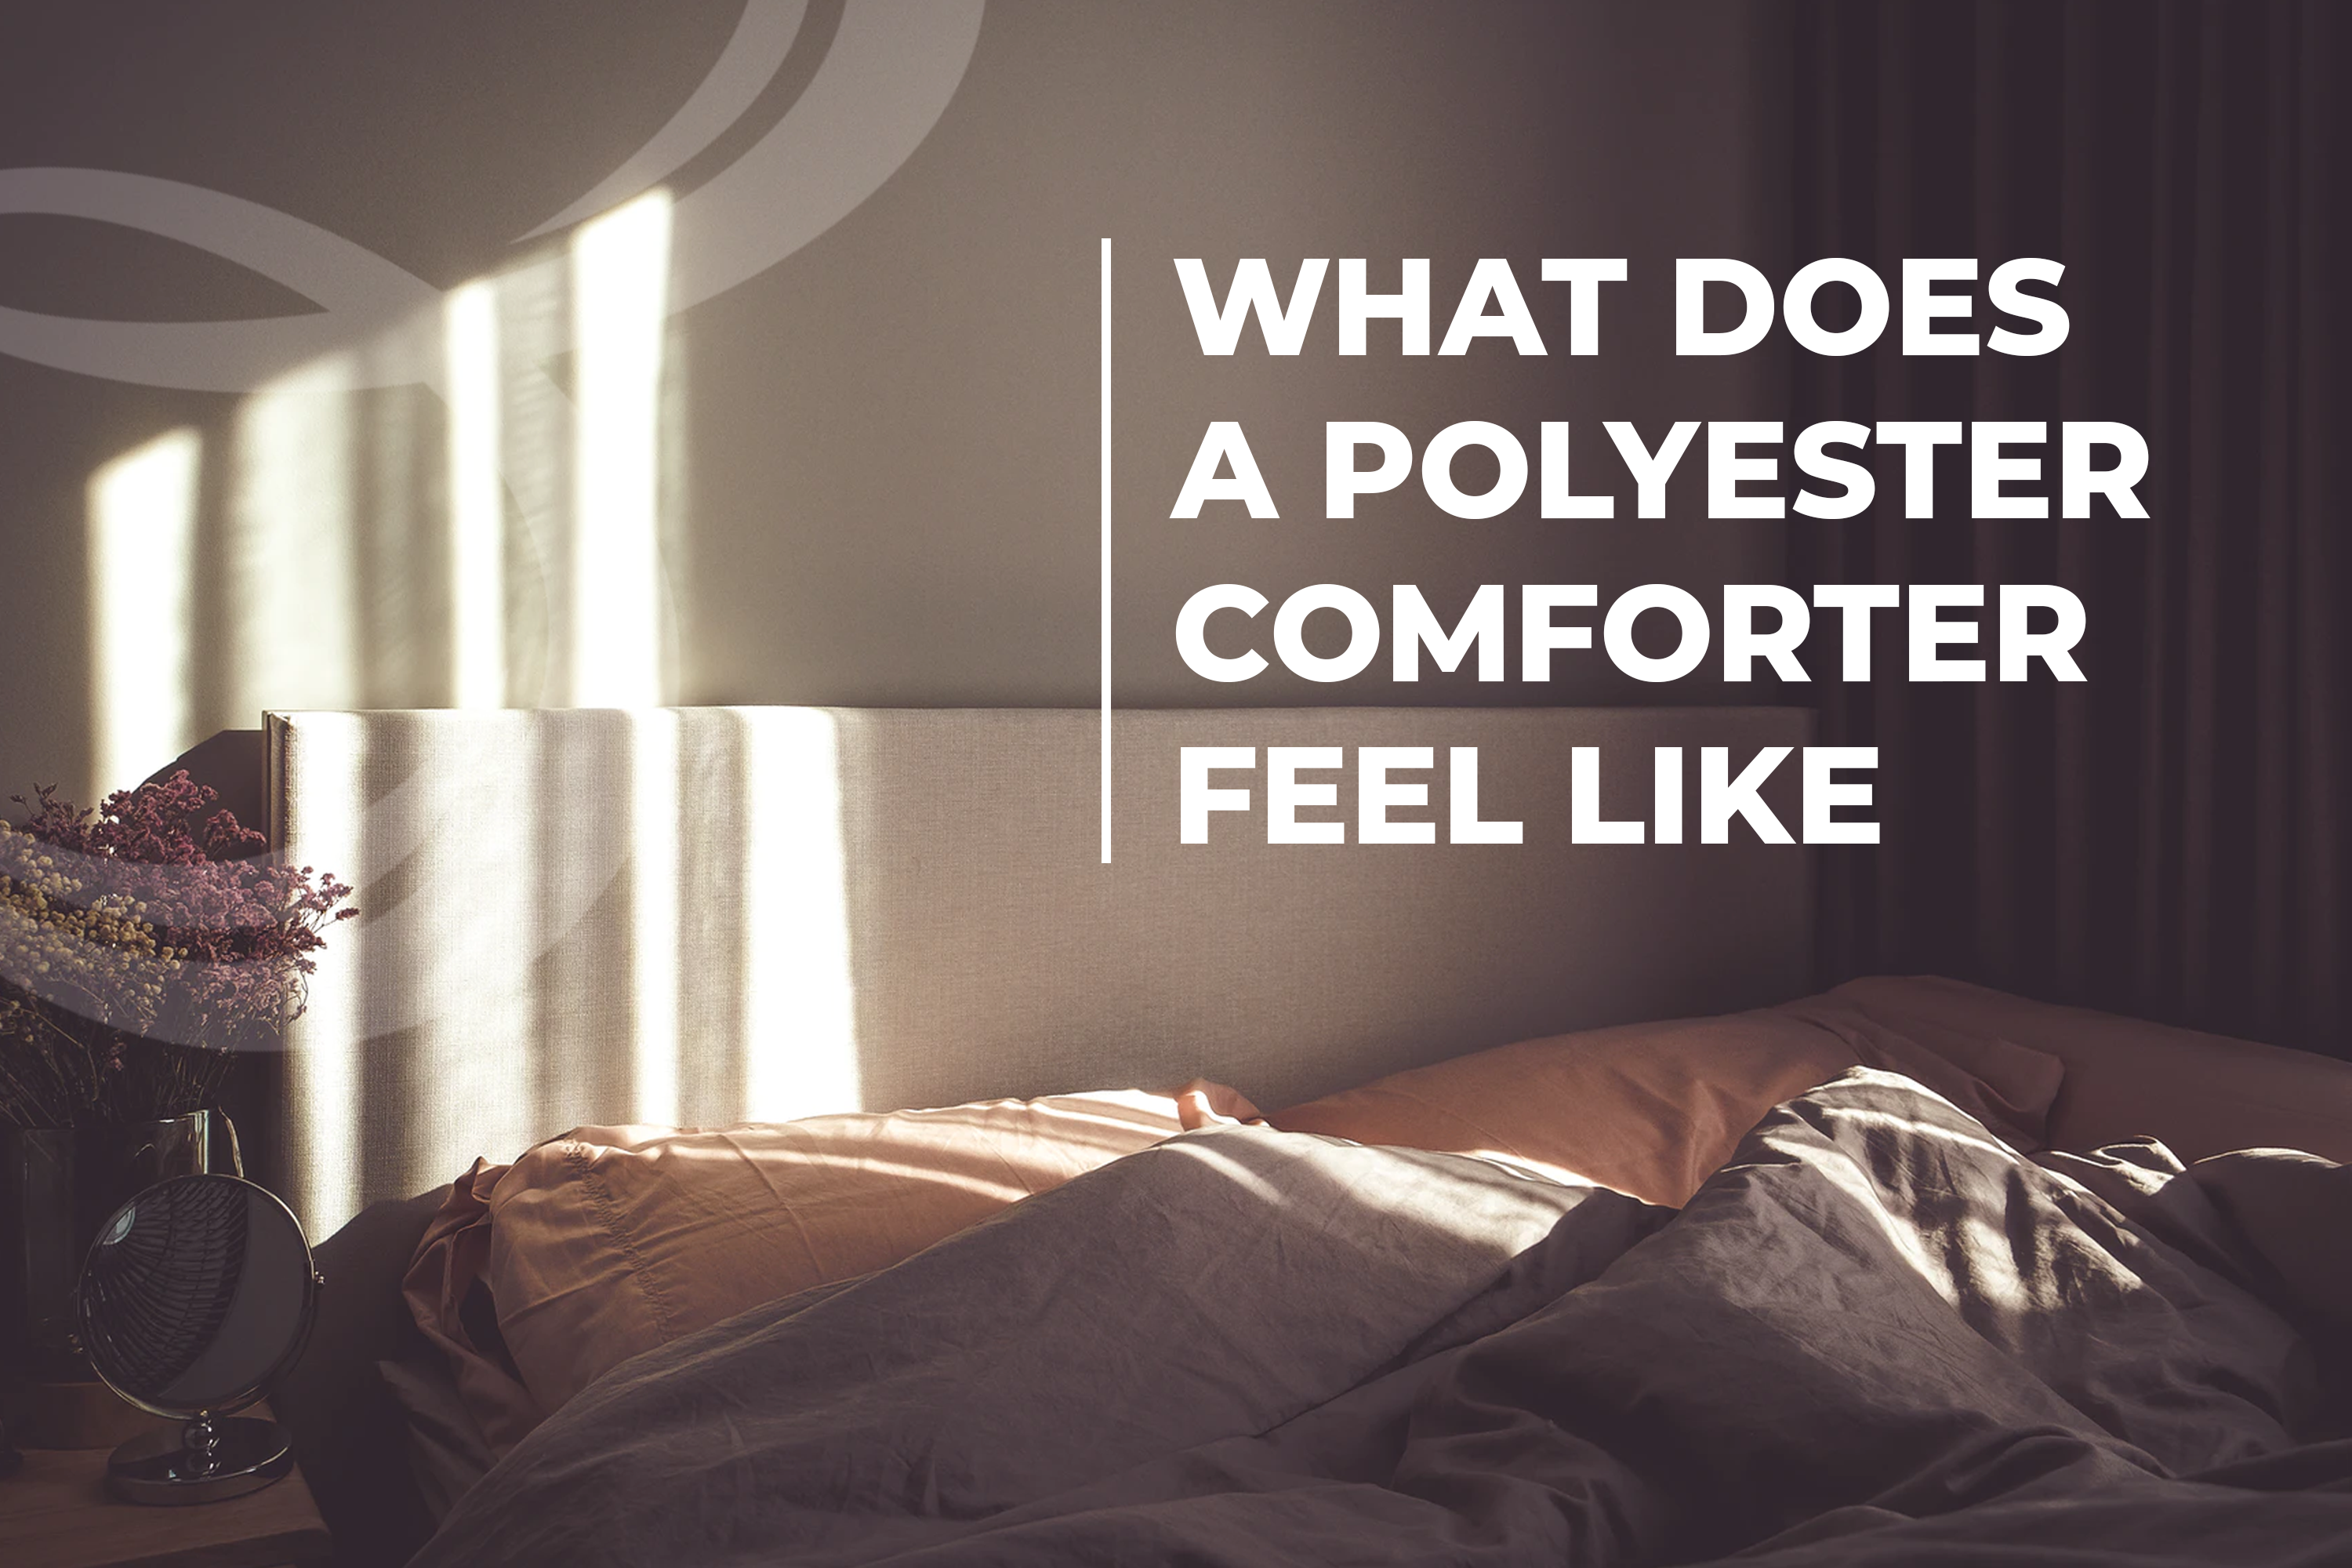 What Does a Polyester Comforter Feel Like